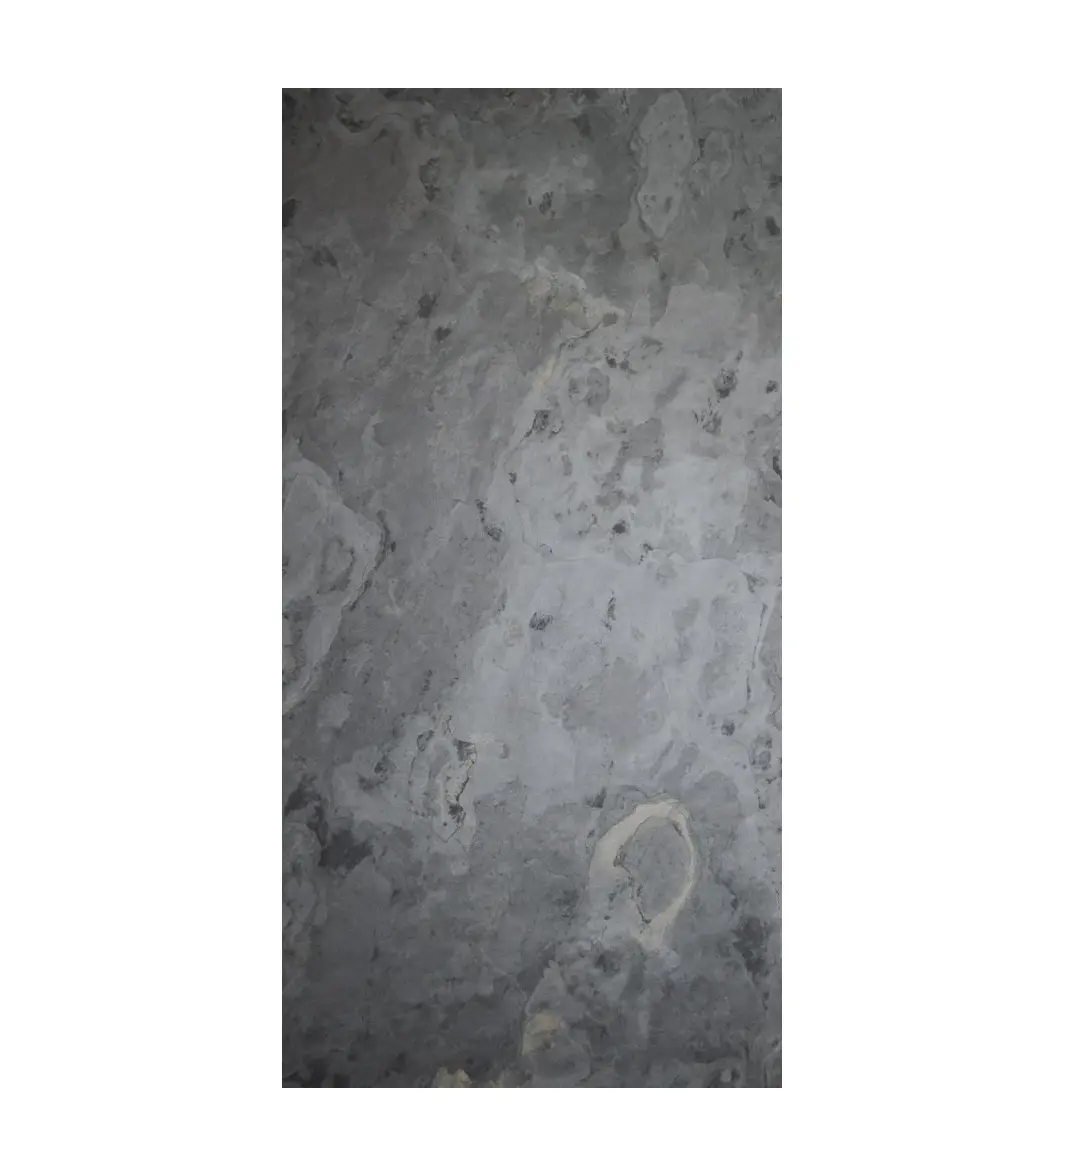 Best Quality Flexible Slate Stone Veneer Grey Beauty Artifical Veneer Stone For Wall Decoration From India